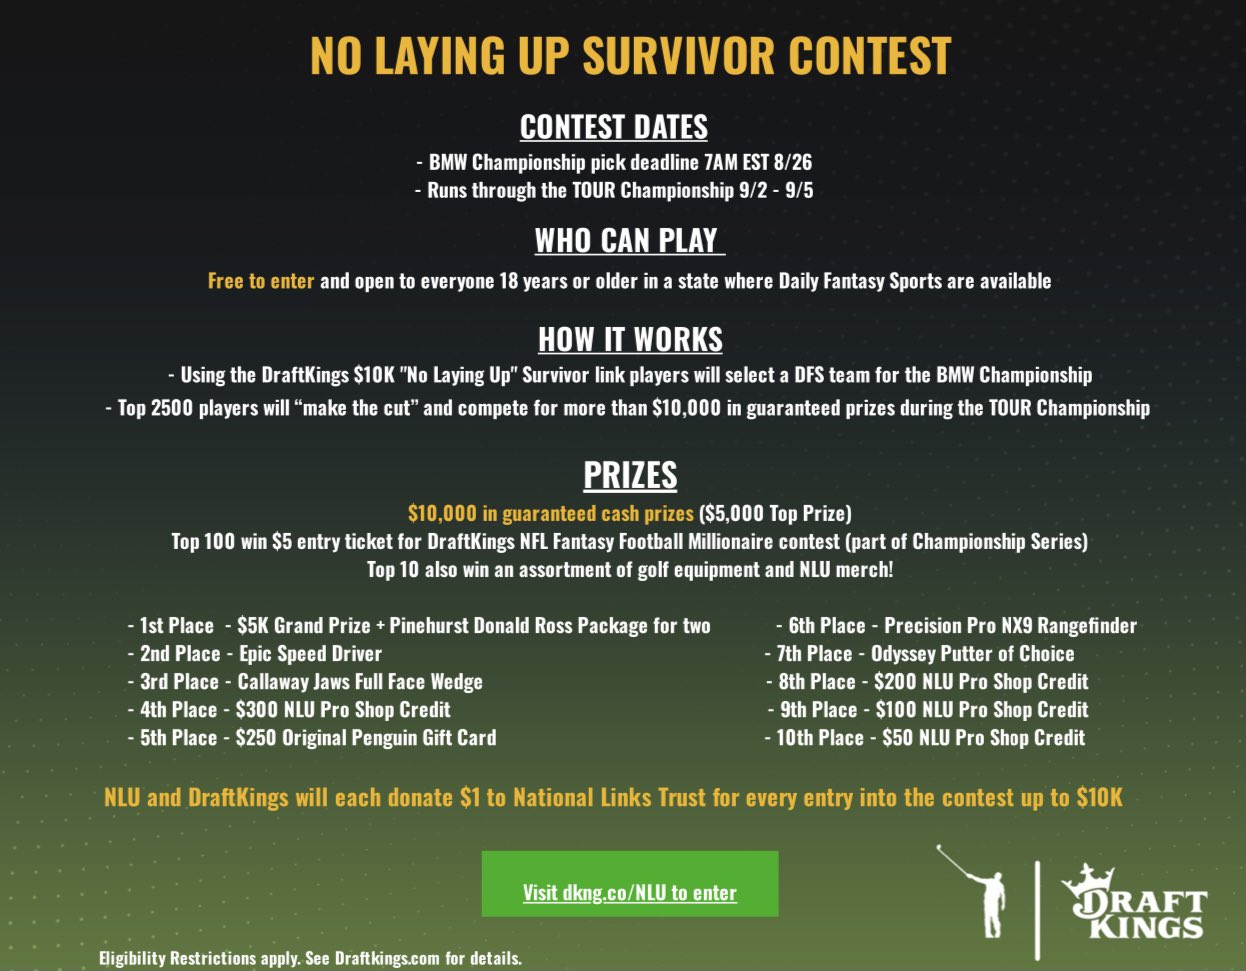 No laying up draftkings promo difference between commonwealth supported place and fee-help loan